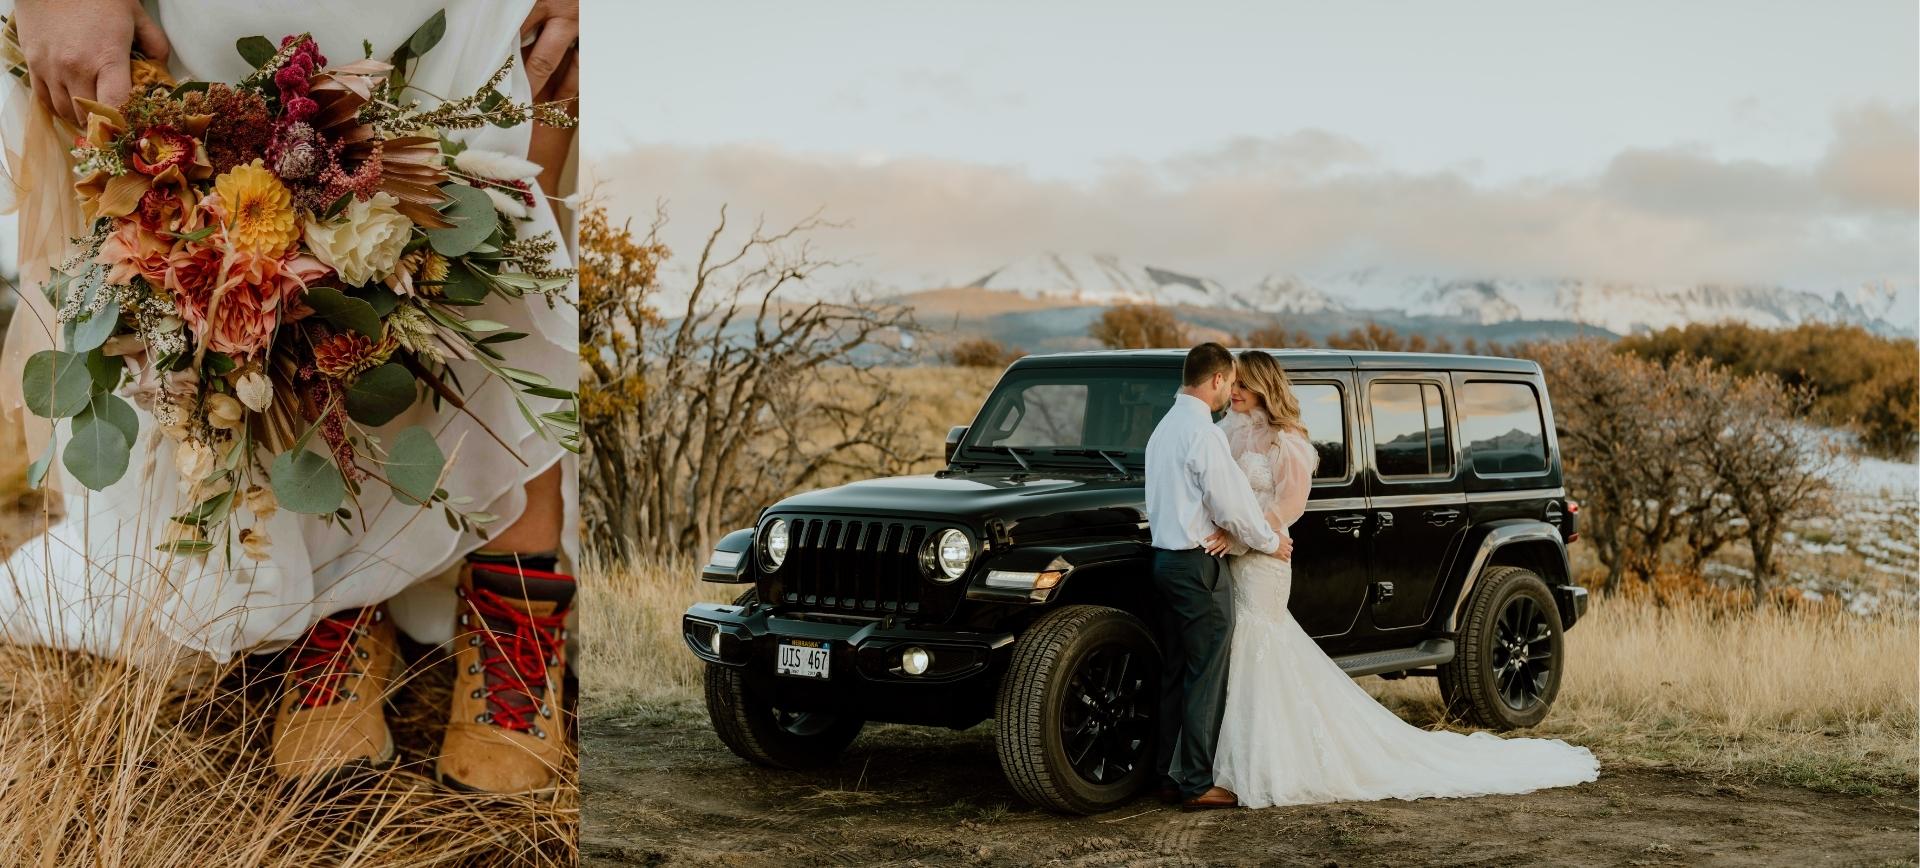 off-road mountain elopement package in colorado - bride and groom with jeep